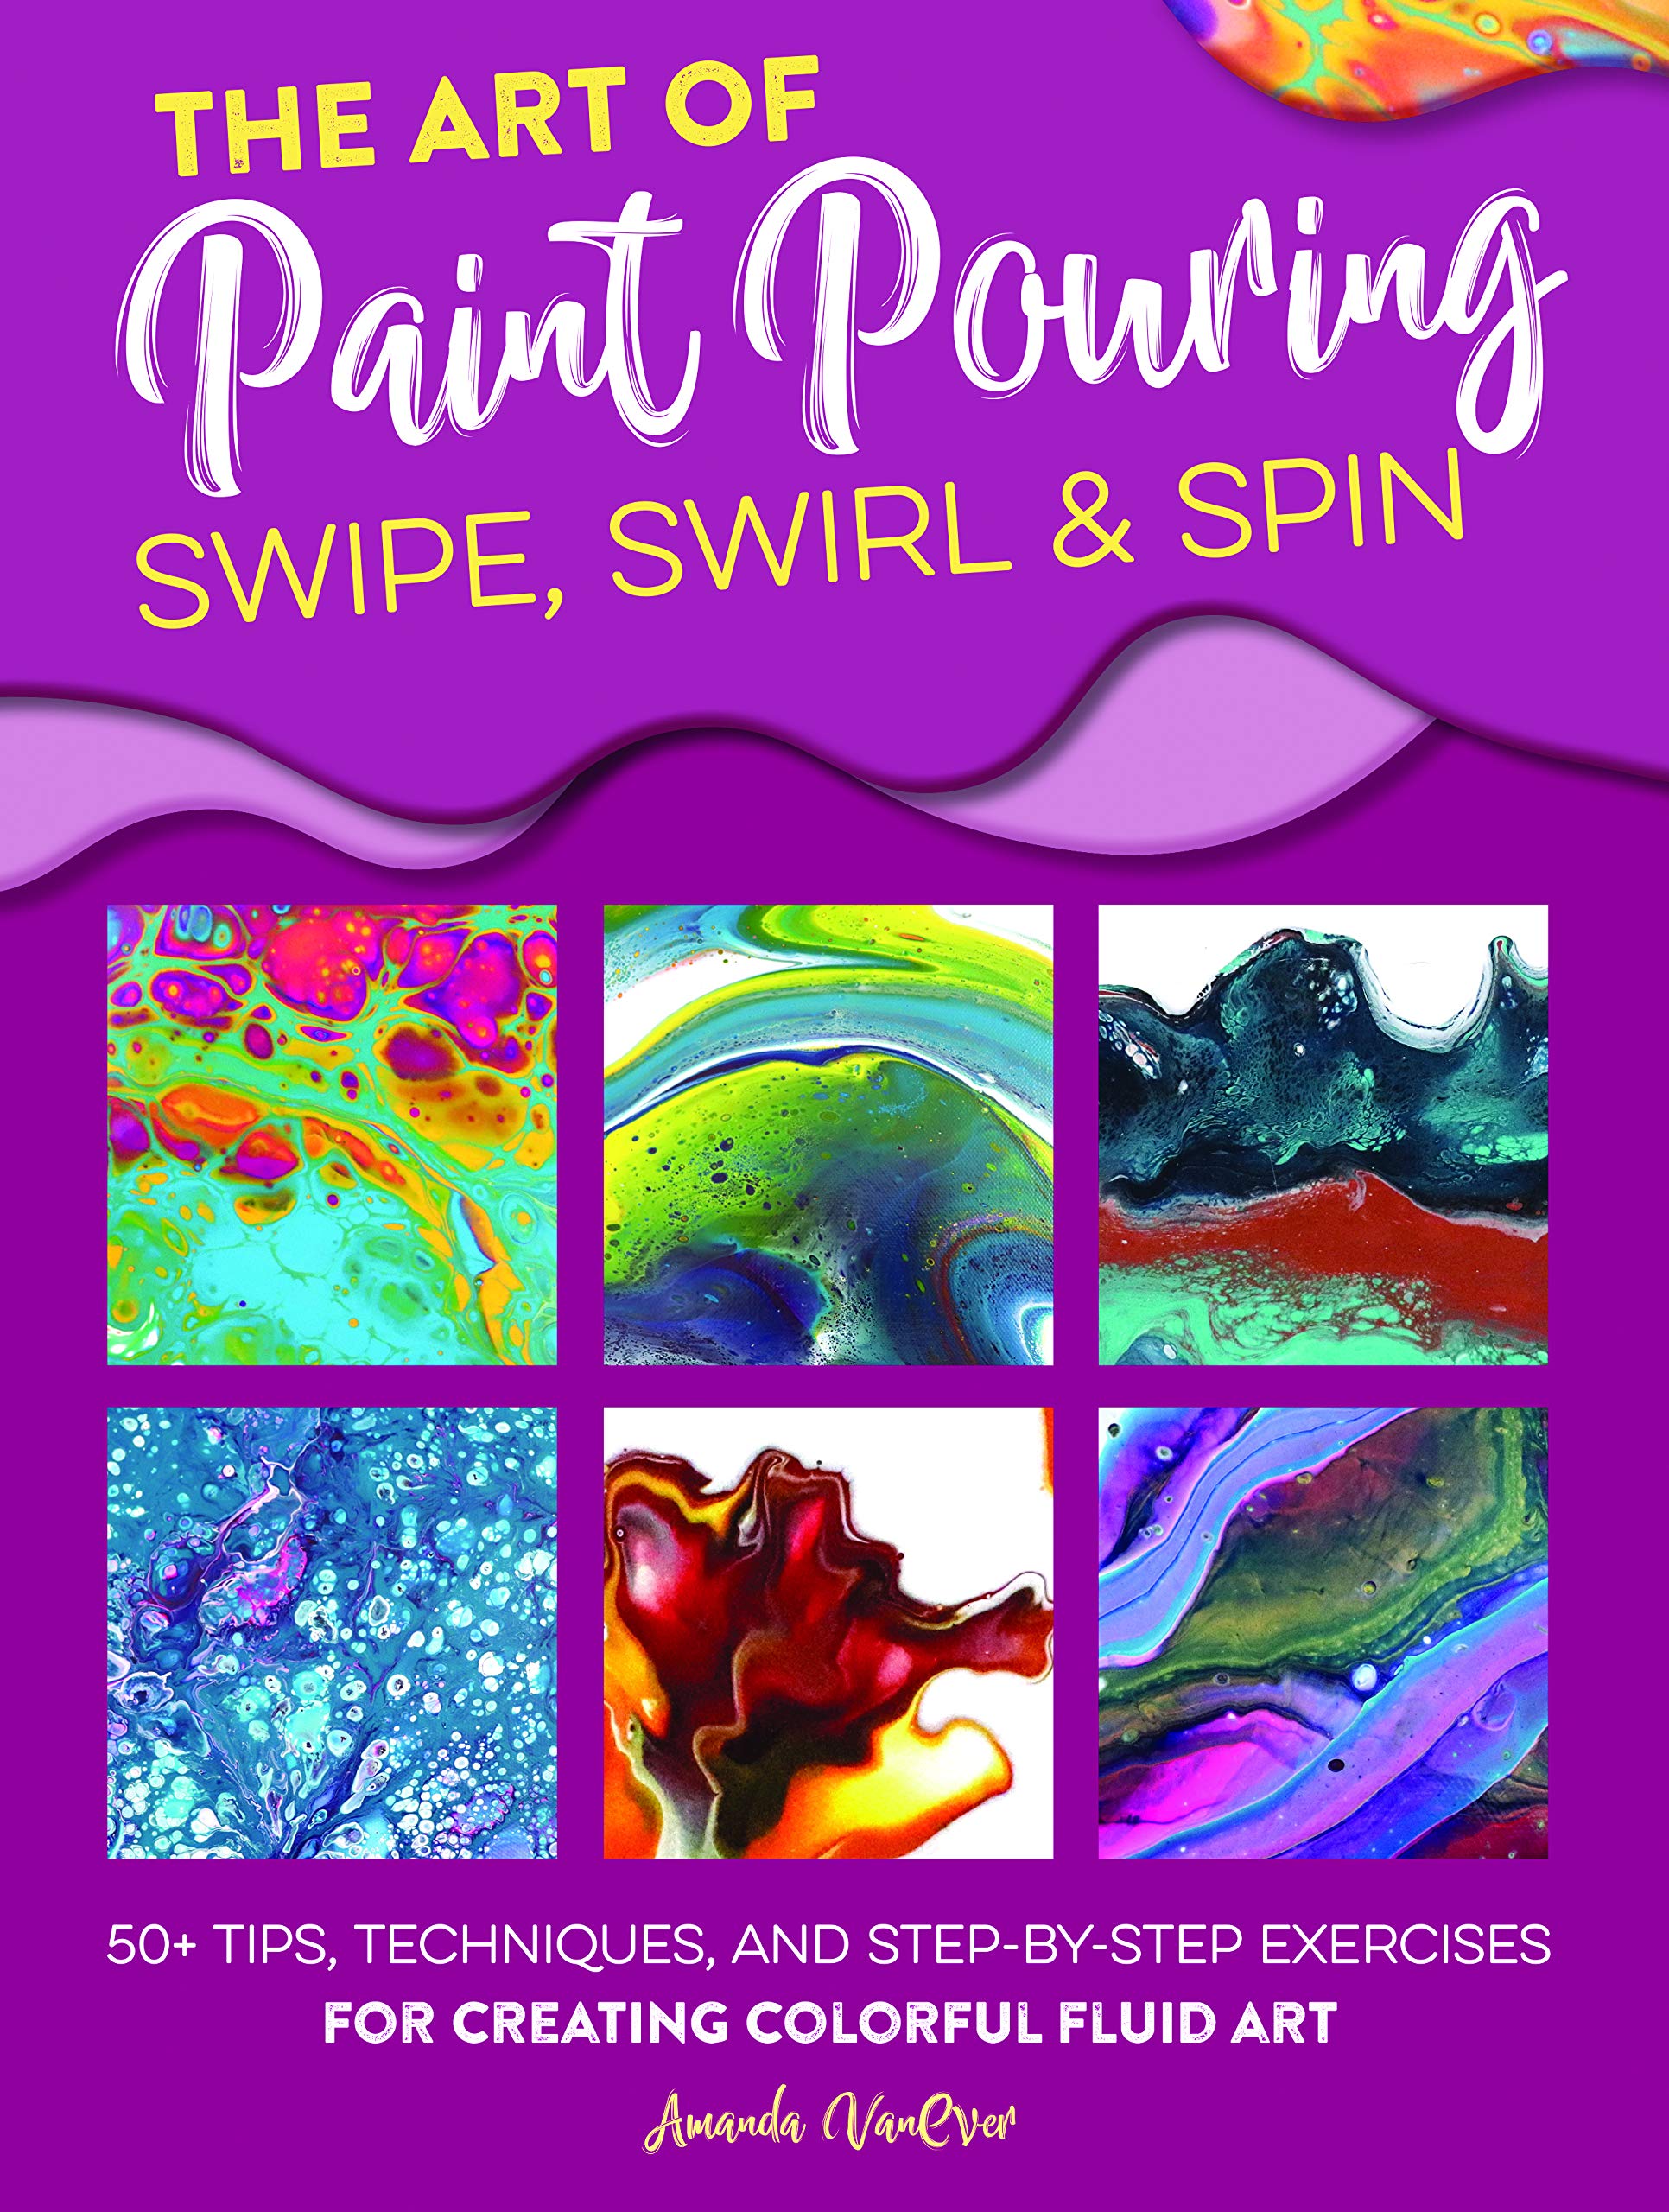 The Art of Paint Pouring: Swipe, Swirl & Spin - A. VanEver